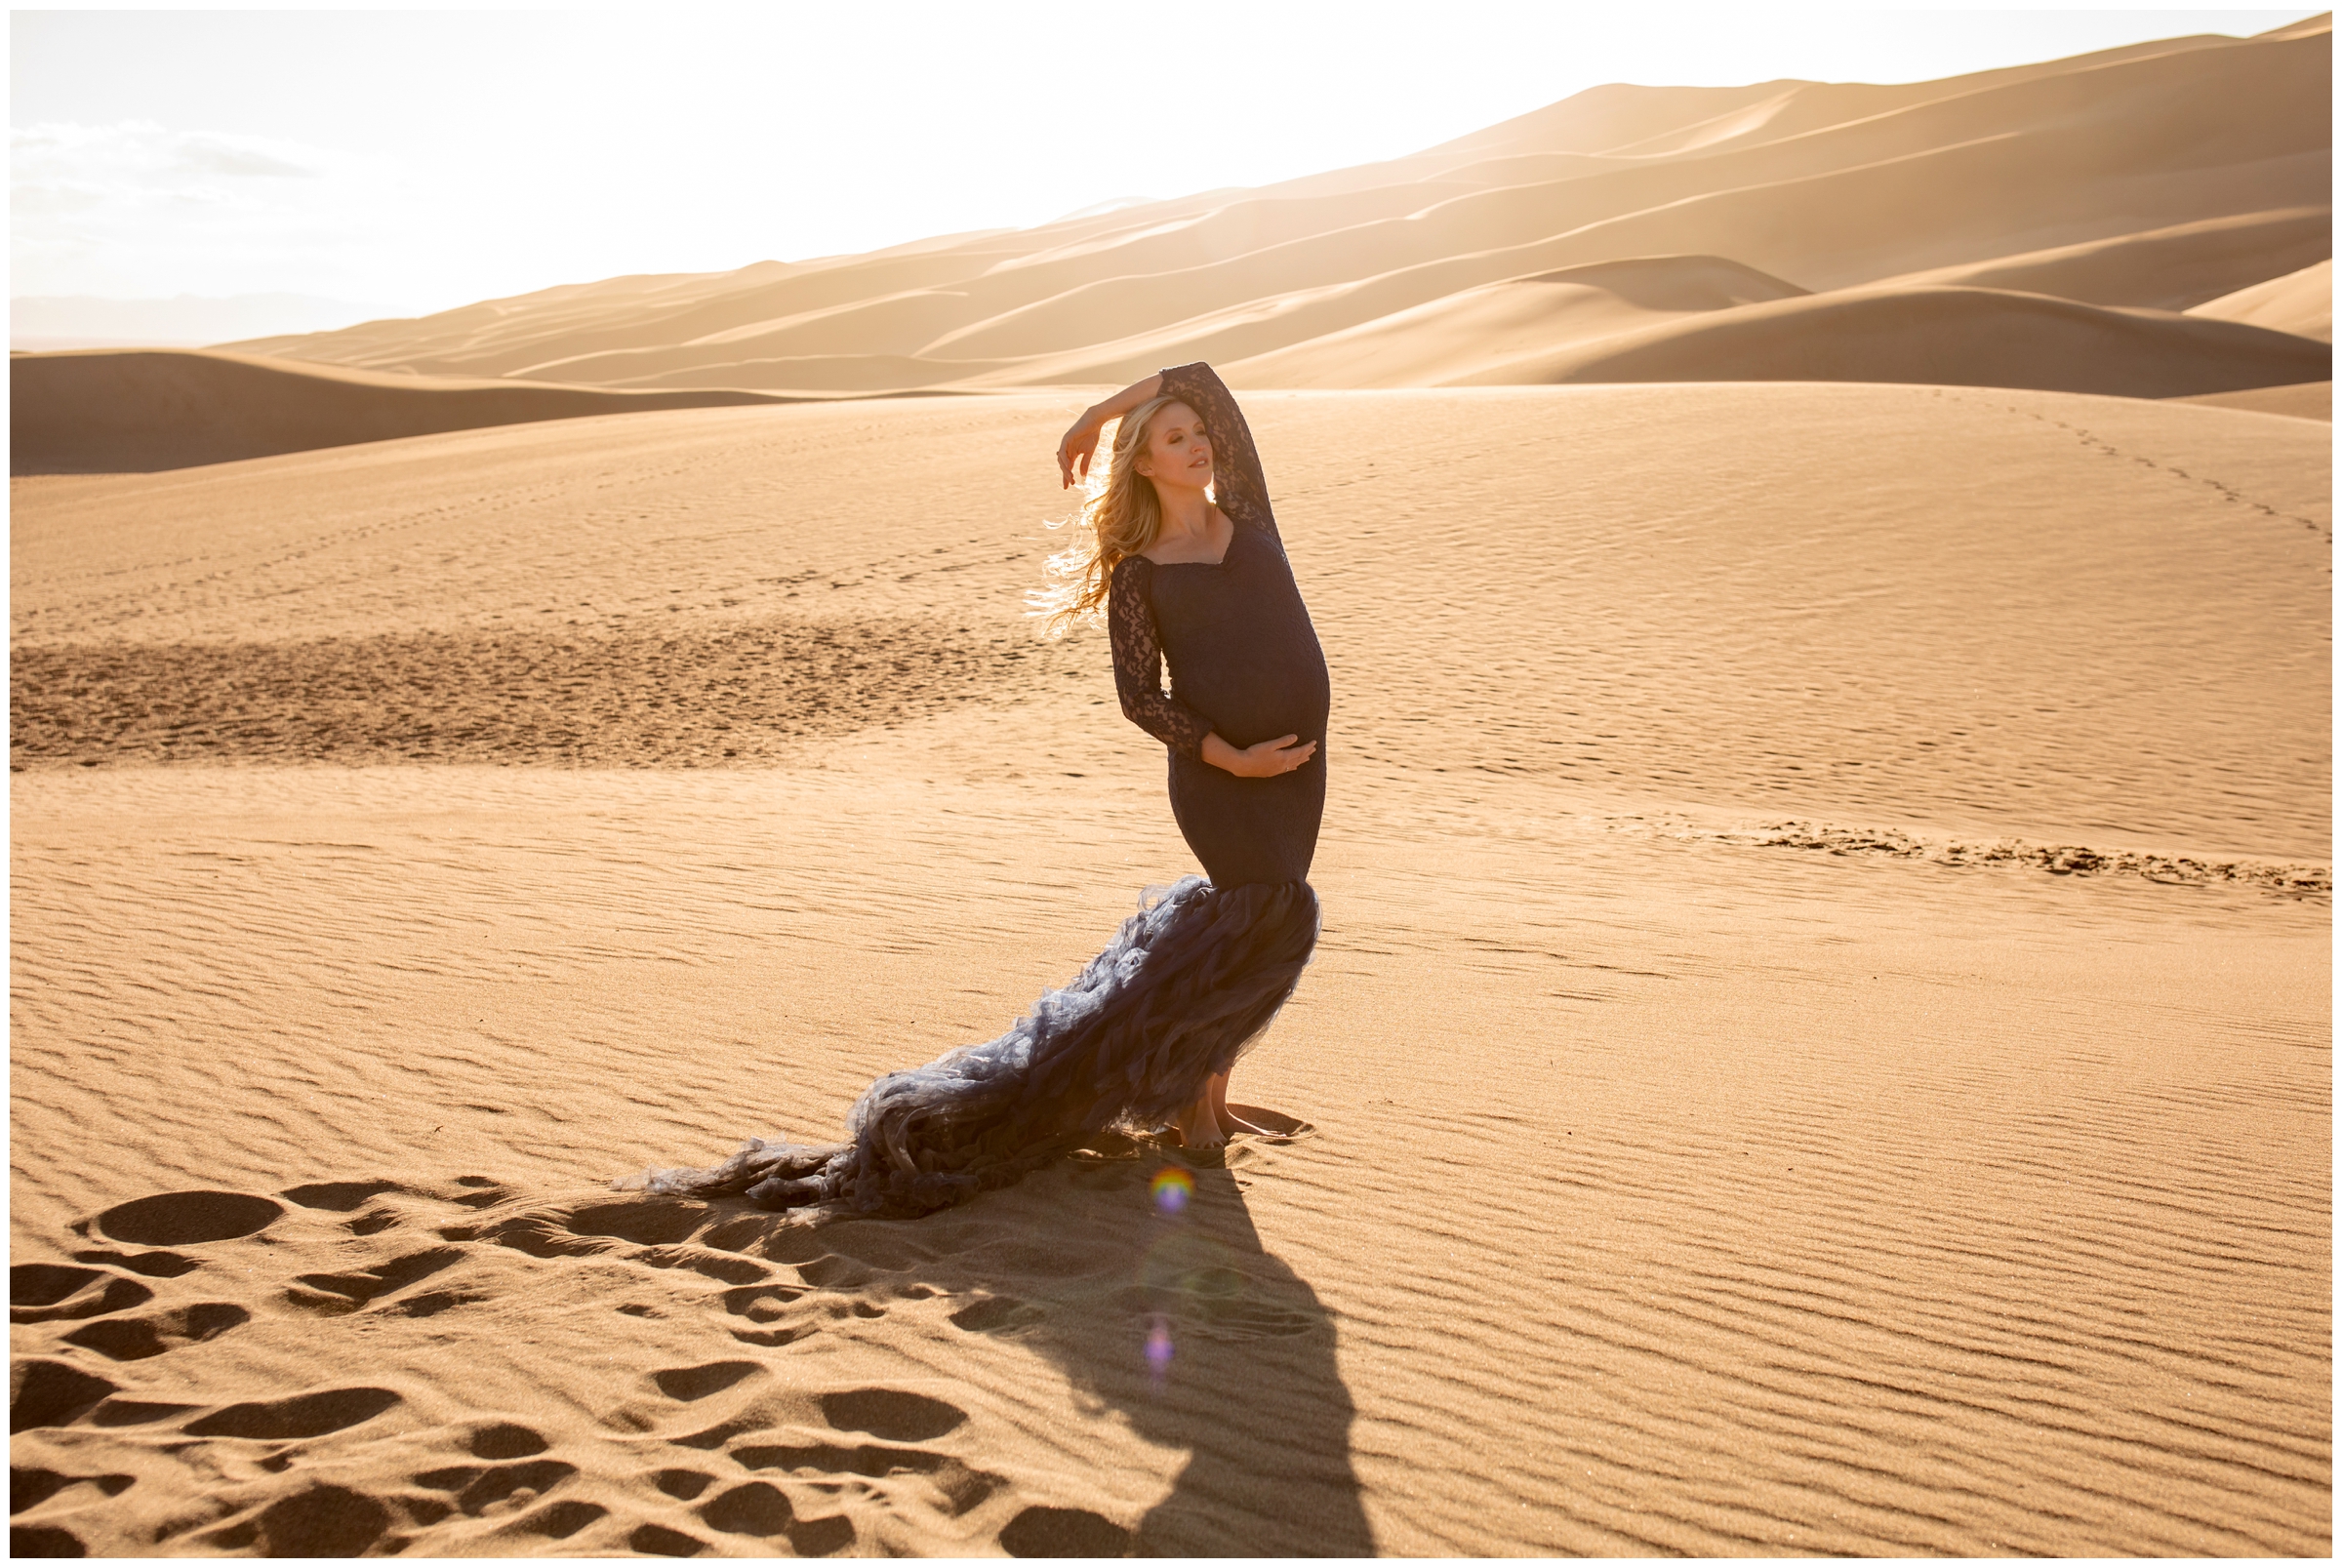 navy blue mermaid style maternity dress at Great Sand Dunes National Park 